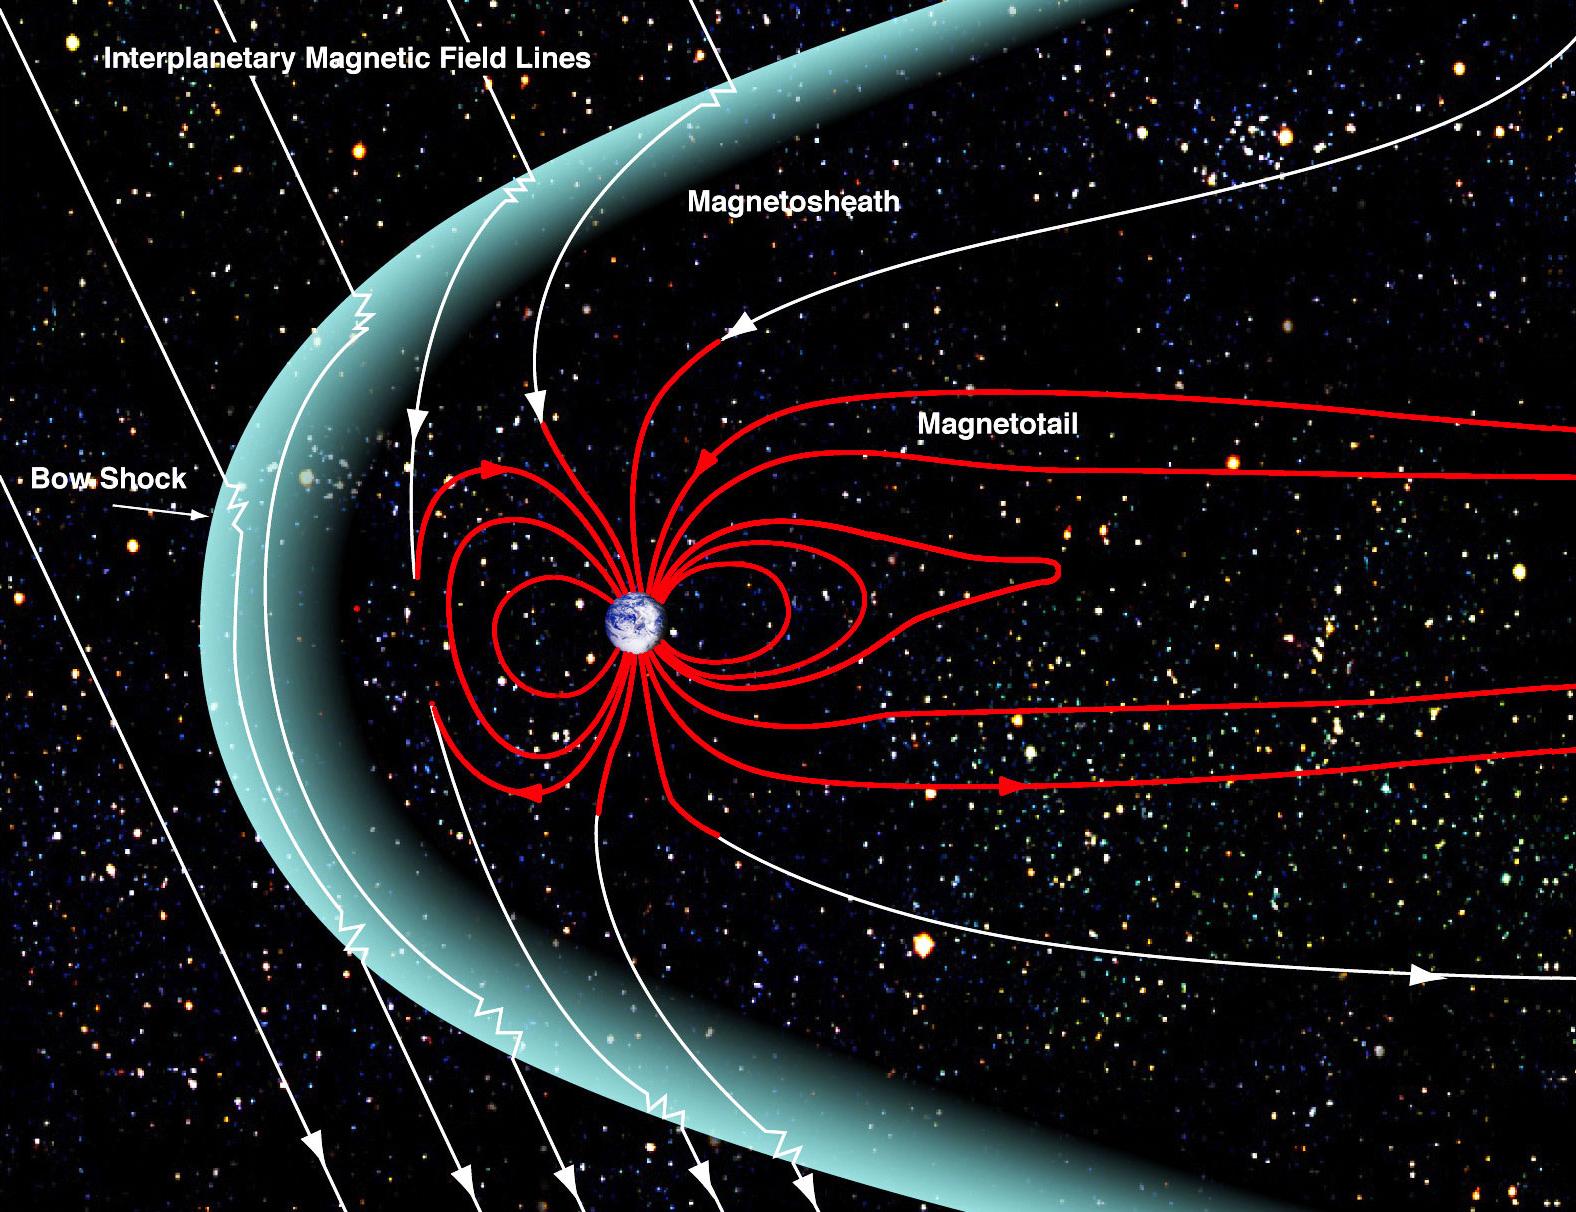 The shape of the Earth's magnetosphere (that area of space controlled by the planet's magnetic field, which is depicted here in red lines) is the direct result of being blasted by solar wind. The Earth's magnetosphere is a highly dynamic structure that responds dramatically to solar variations. The proposed mission, STORM, would provide the first global view of interactions between solar wind and the magnetosphere. Image Credit, NASA/Goddard/Aaron Kaase.